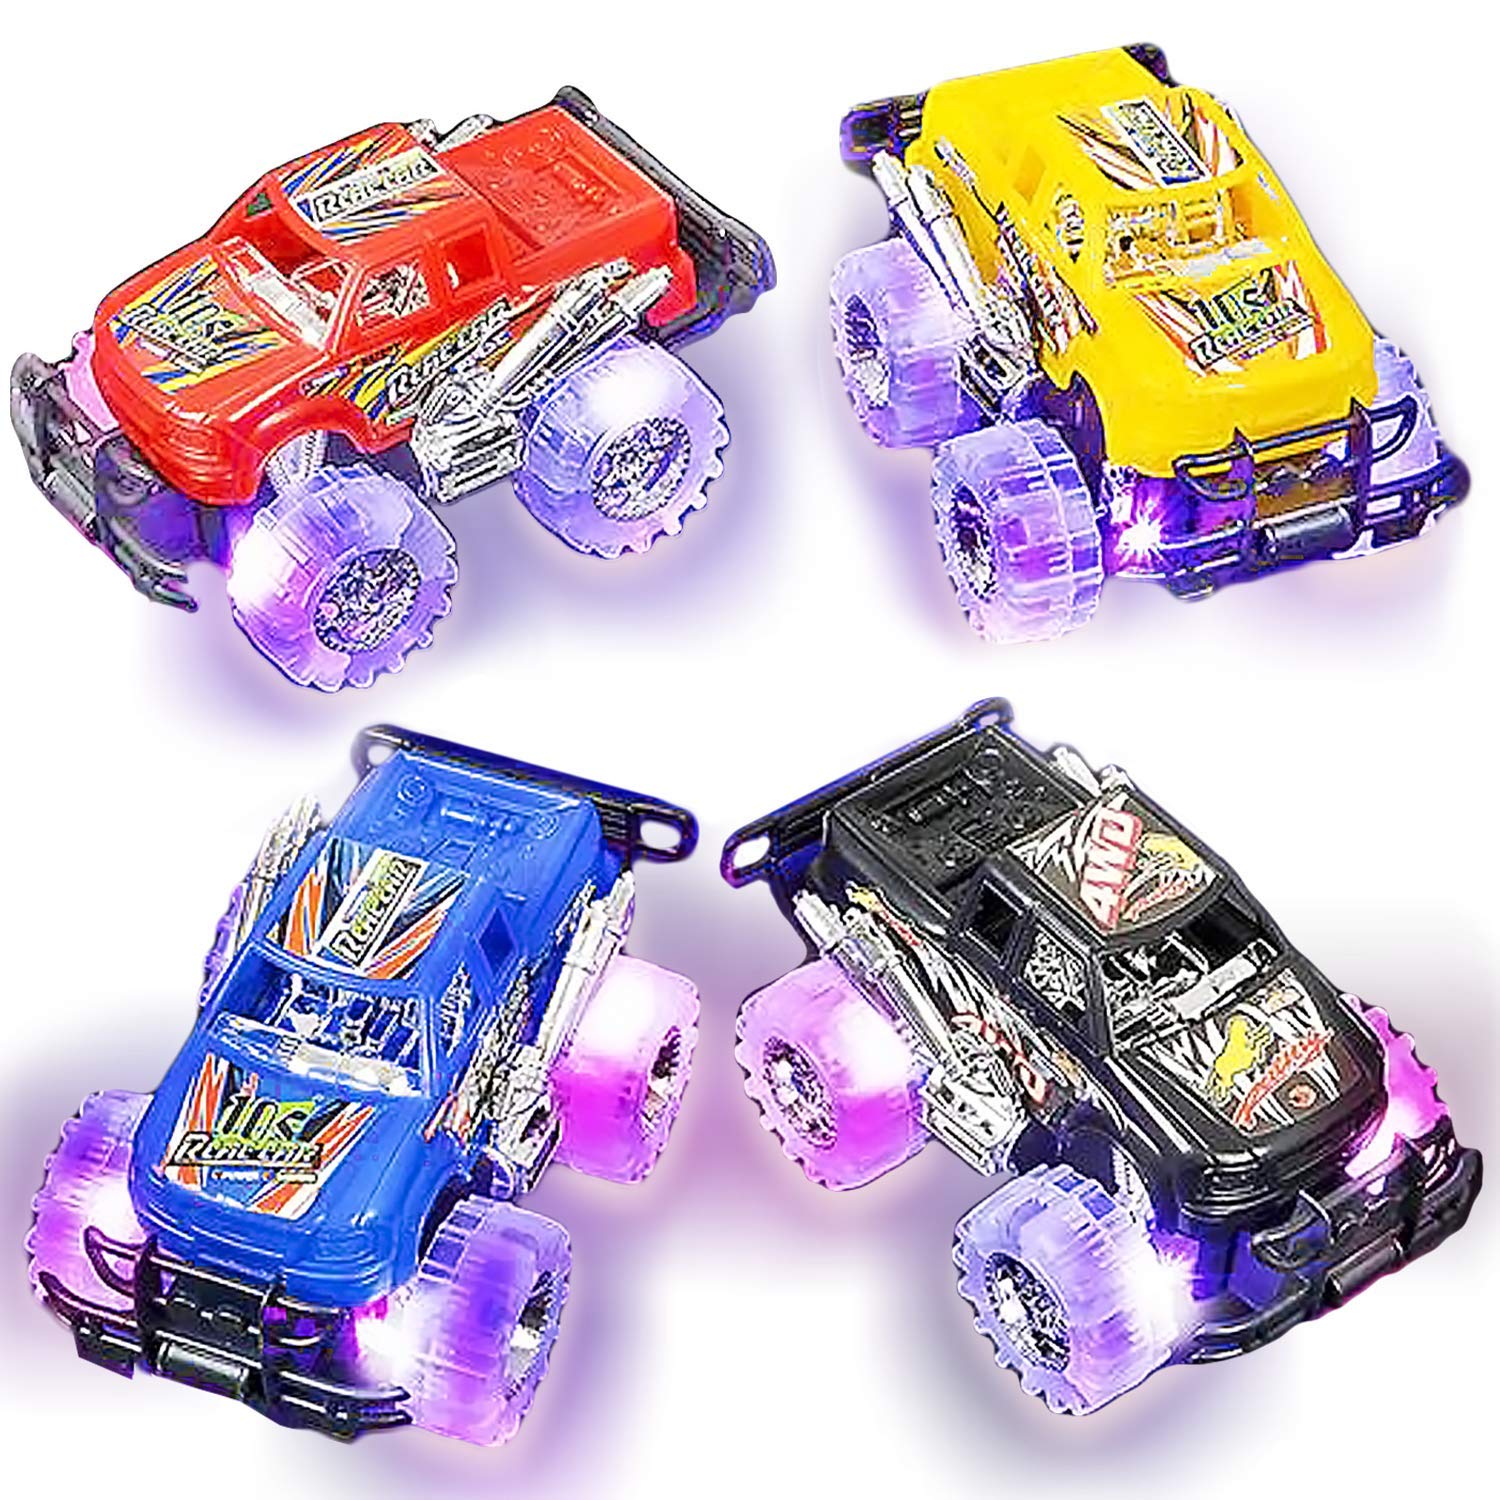 Light Up Monster Truck Set for Boys and Girls by ArtCreativity - Set Includes 2, 6 Inch Monster Trucks with Beautiful Flashing LED Tires - Push n Go Toy Cars Fun Gift for Kids - for Ages 3+